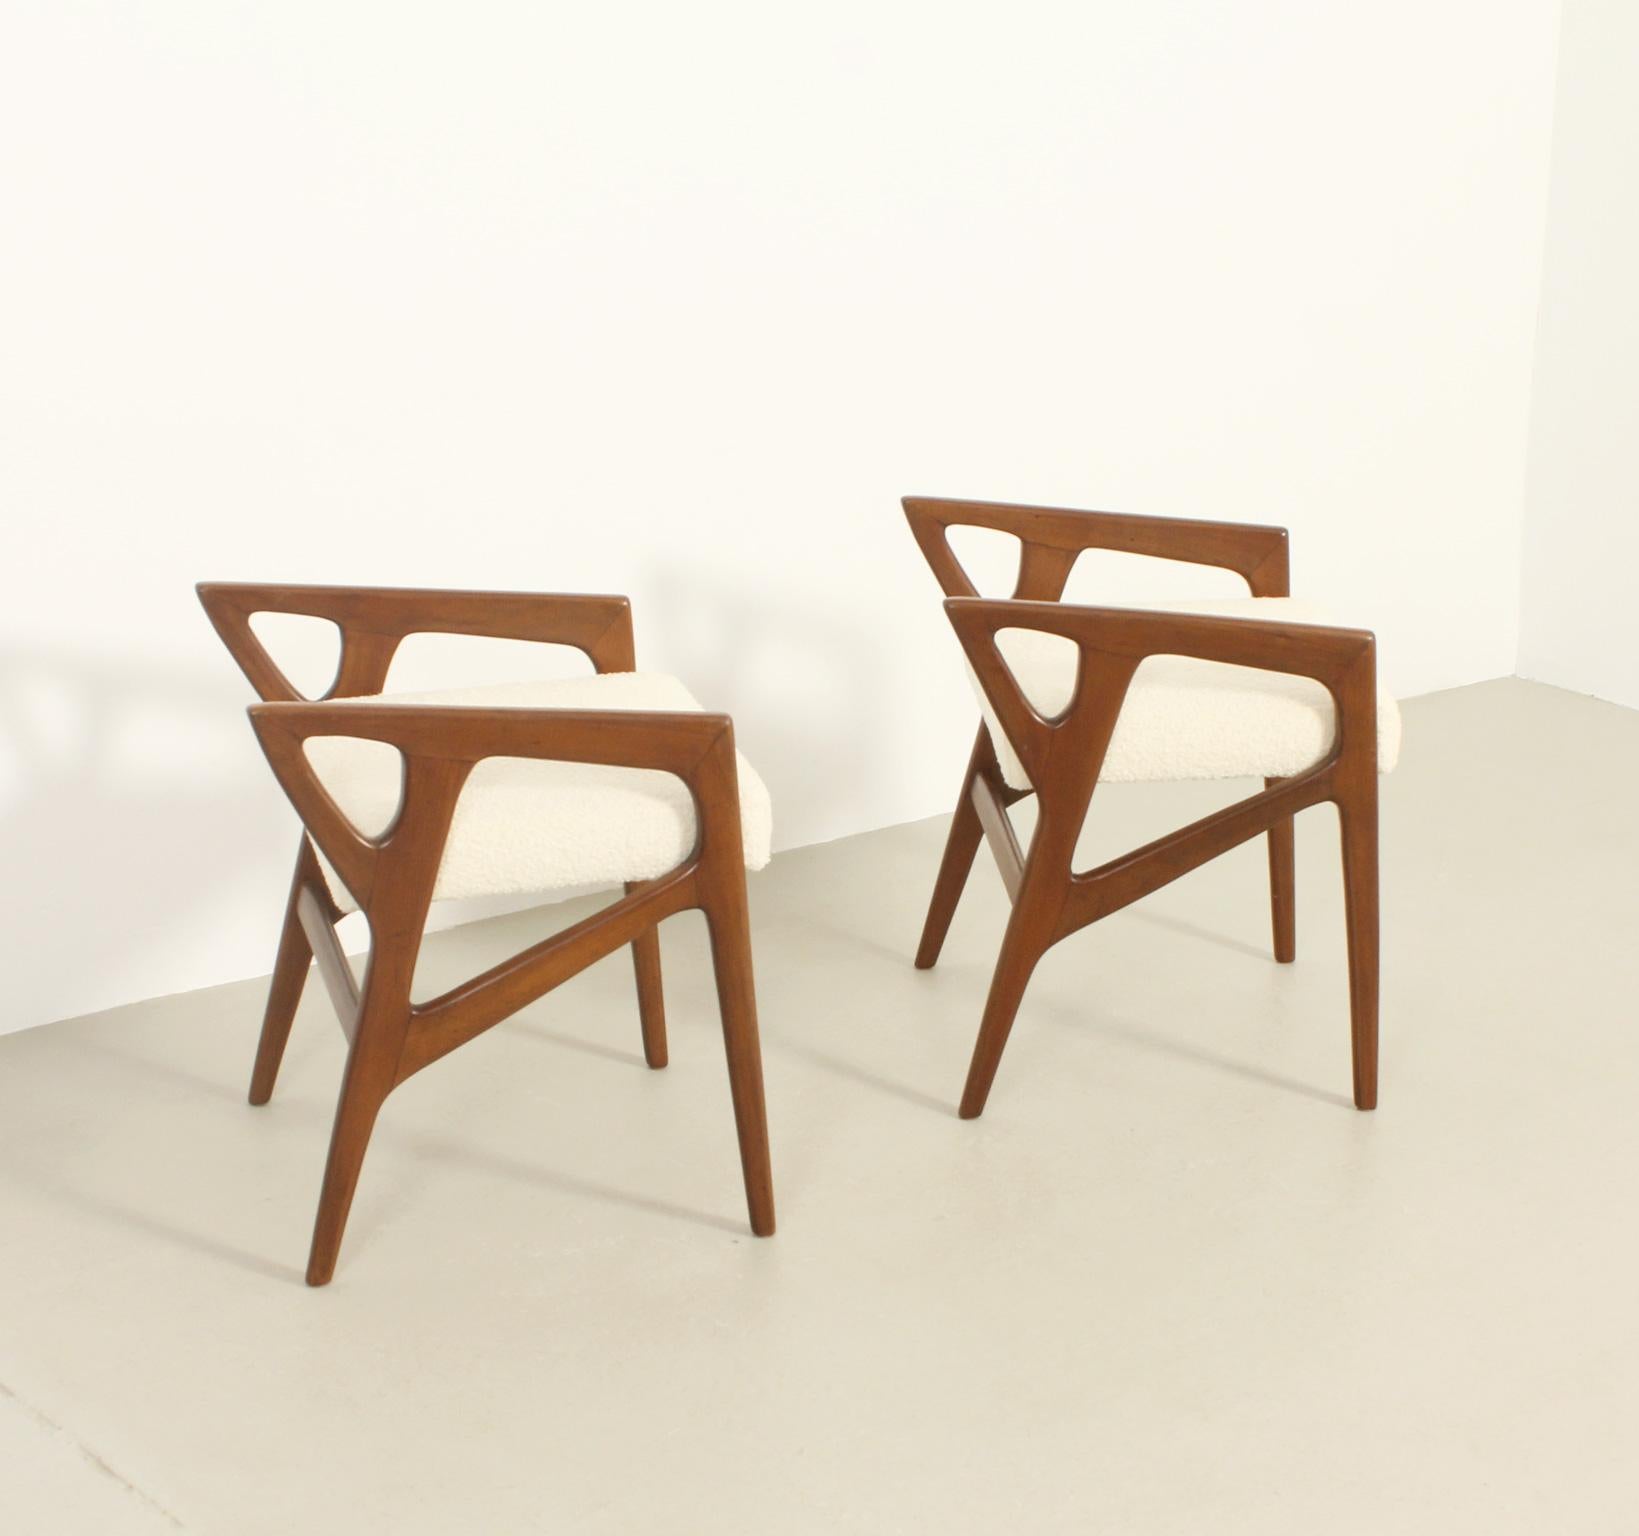 Pair of Stools by Gio Ponti for Cassina, Italy, 1953 For Sale 3